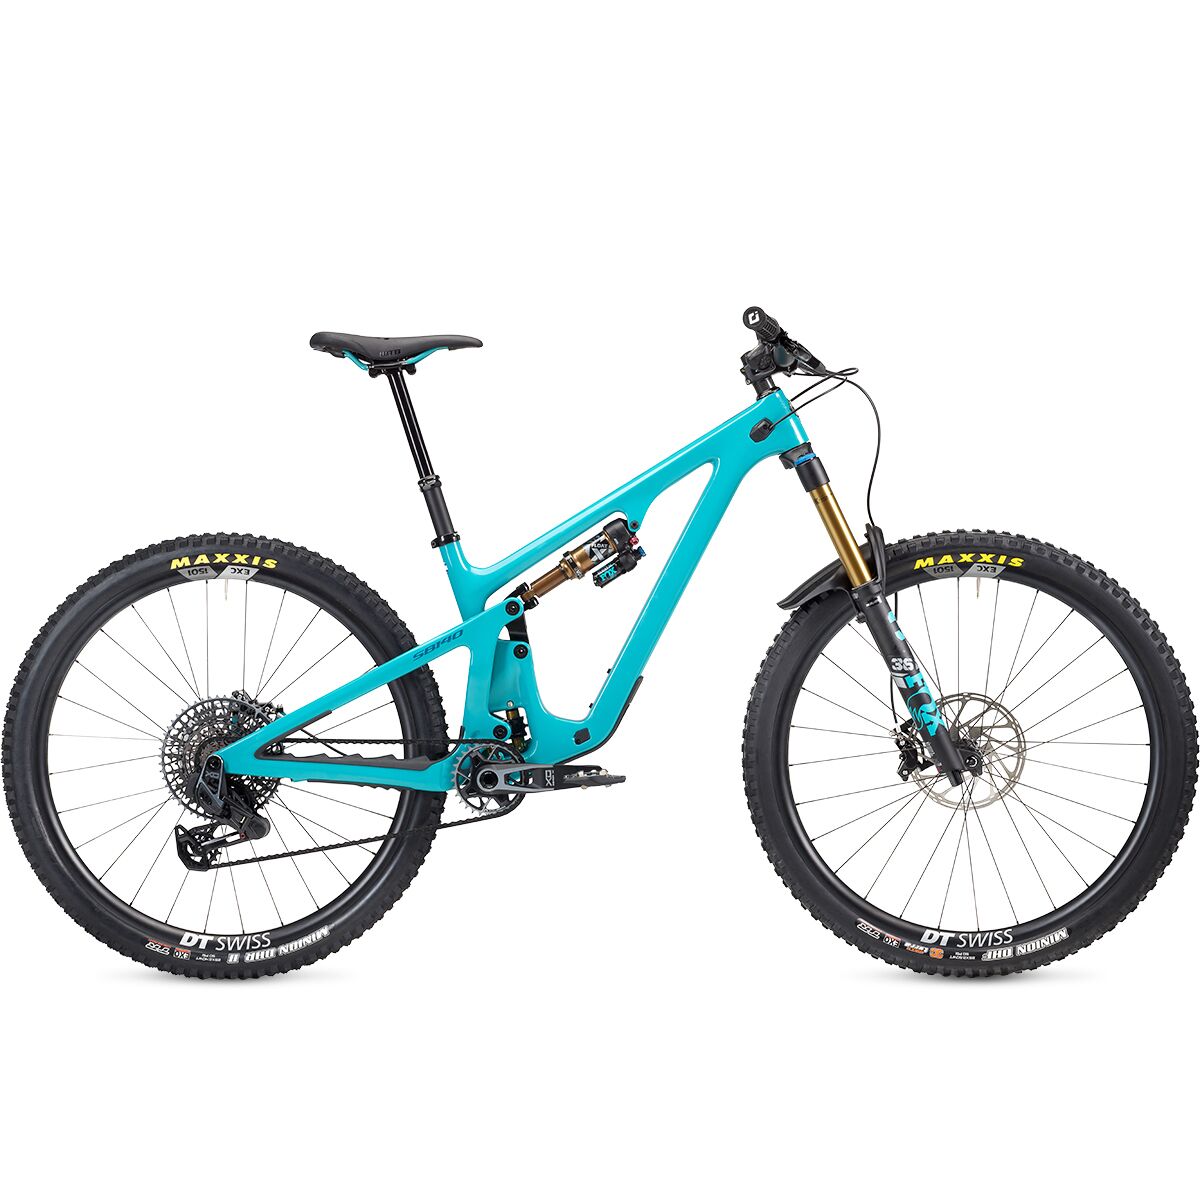 Yeti Cycles SB140 T3 TLR X0 Eagle T-Type 29in Carbon Wheel Mountain Bike Turquoise, L